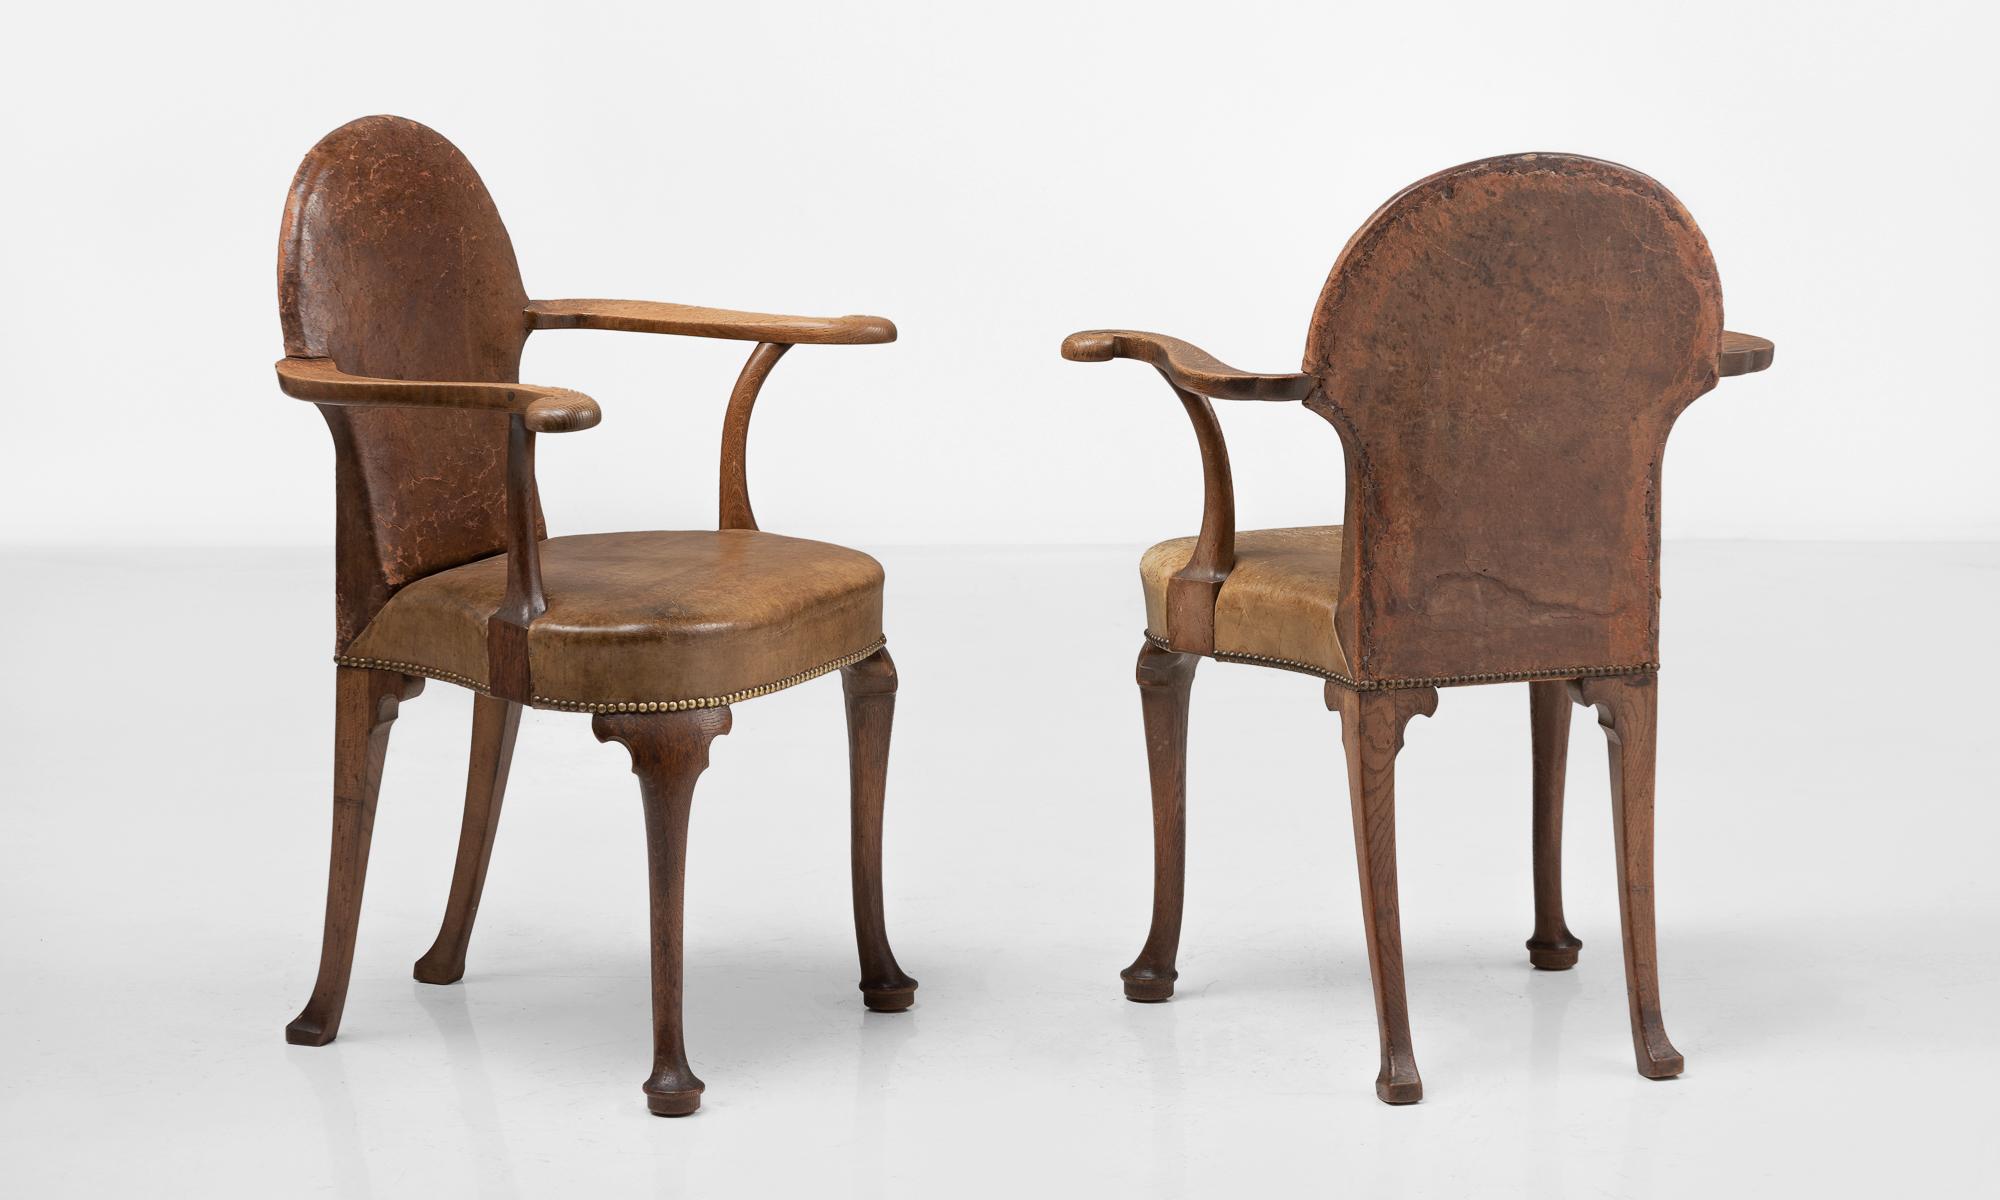 English Pair of Edwardian Oak and Leather Armchairs, England, circa 1900